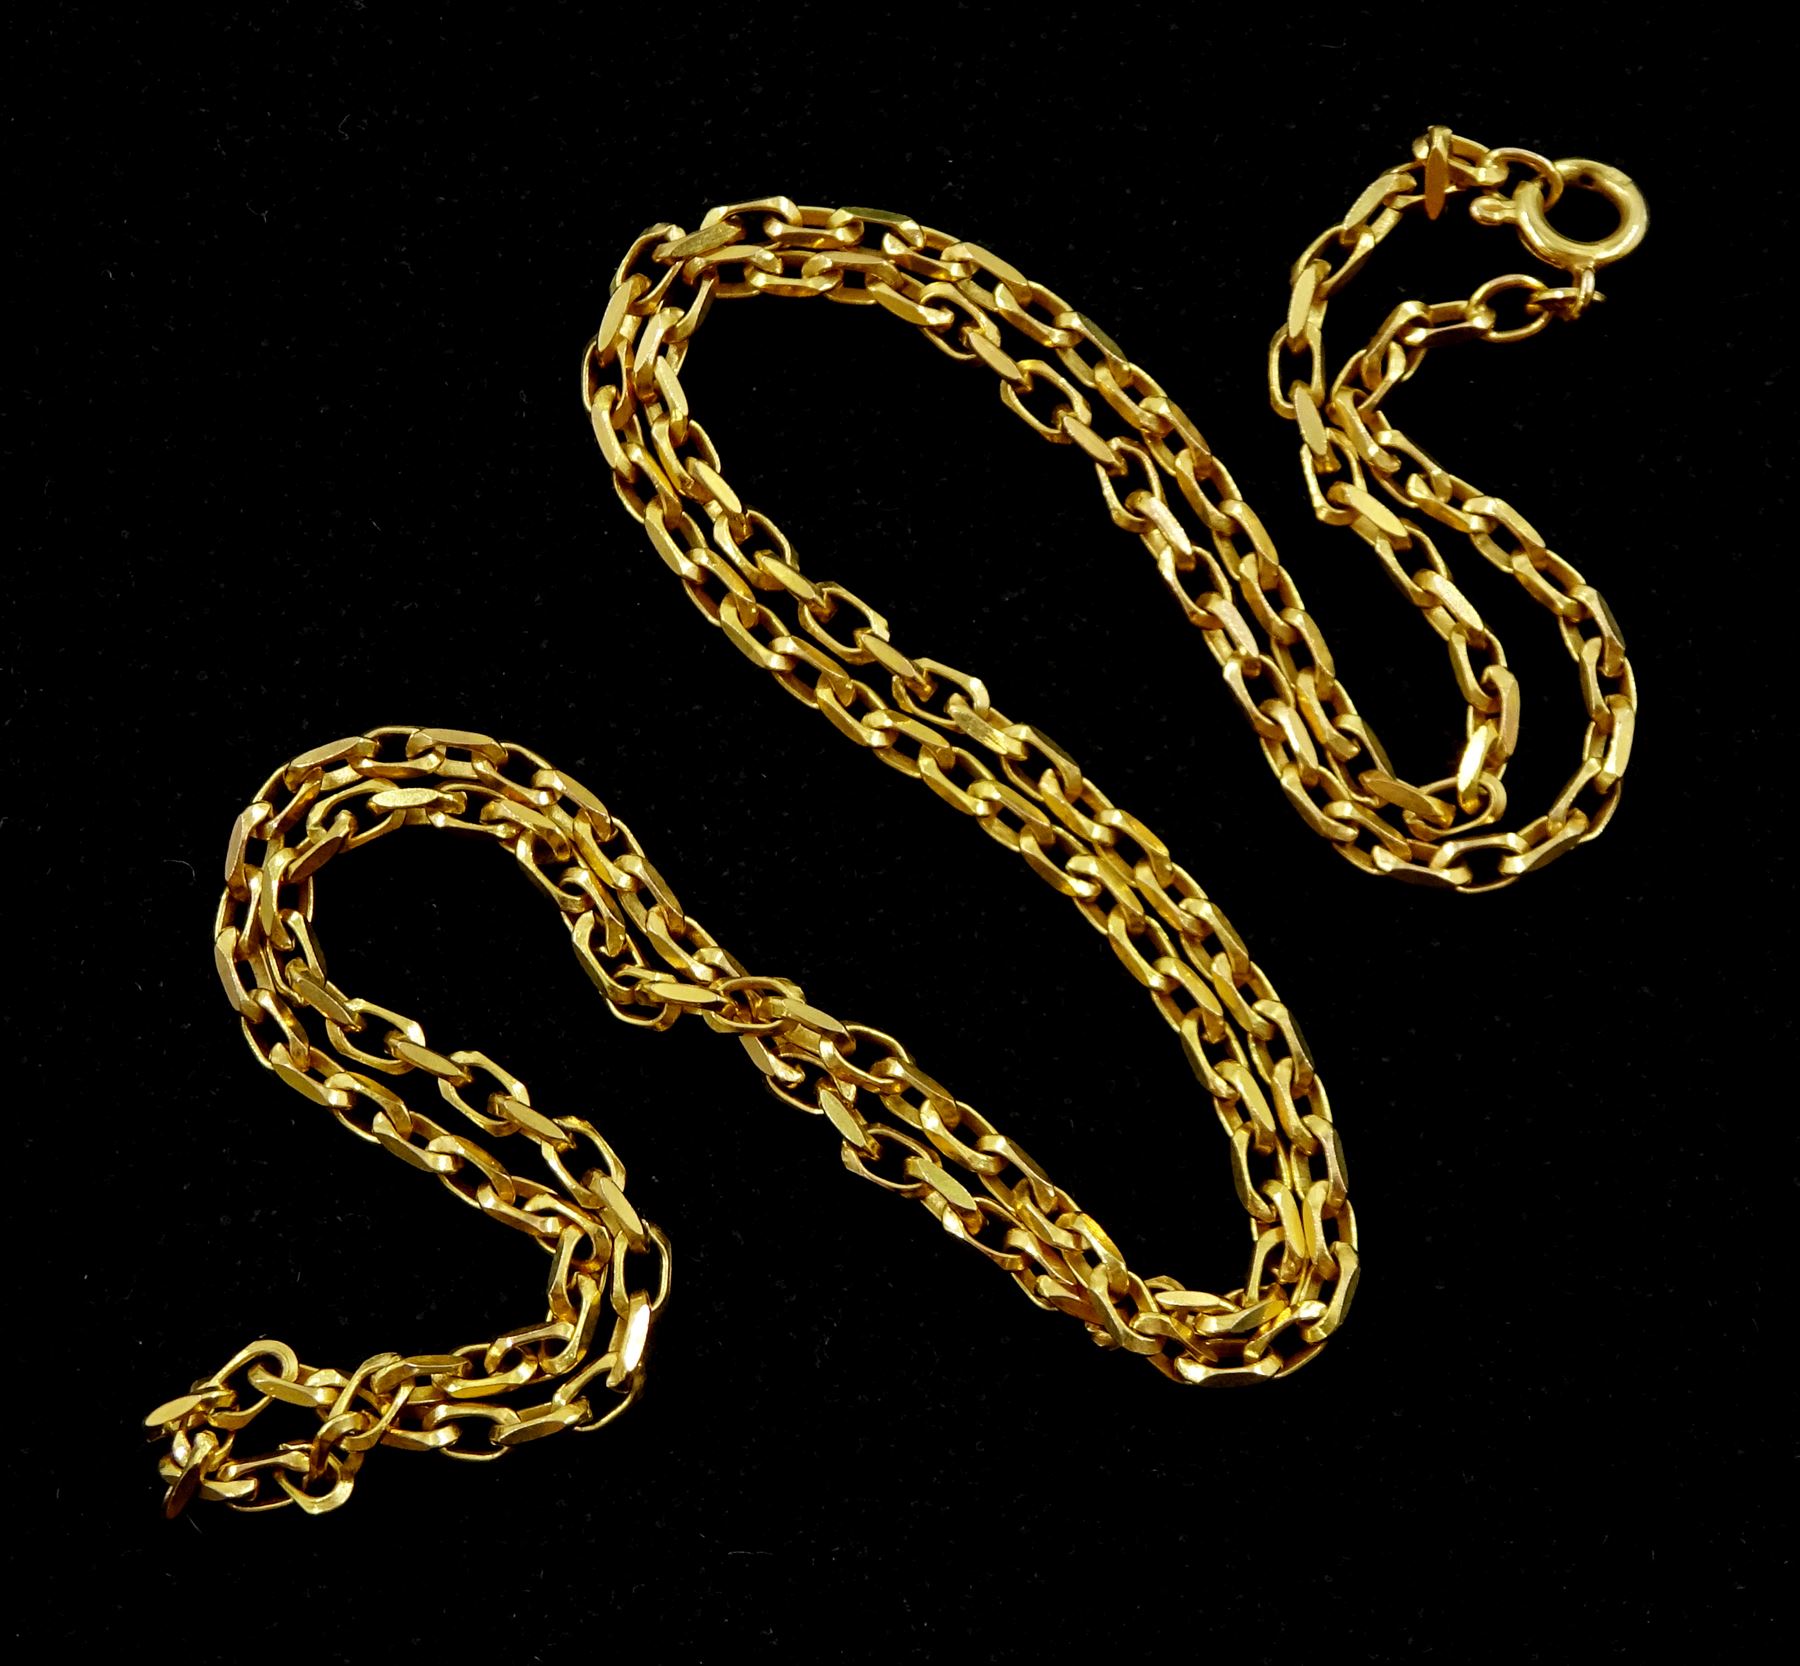 9ct gold cable link chain necklace - Image 2 of 2